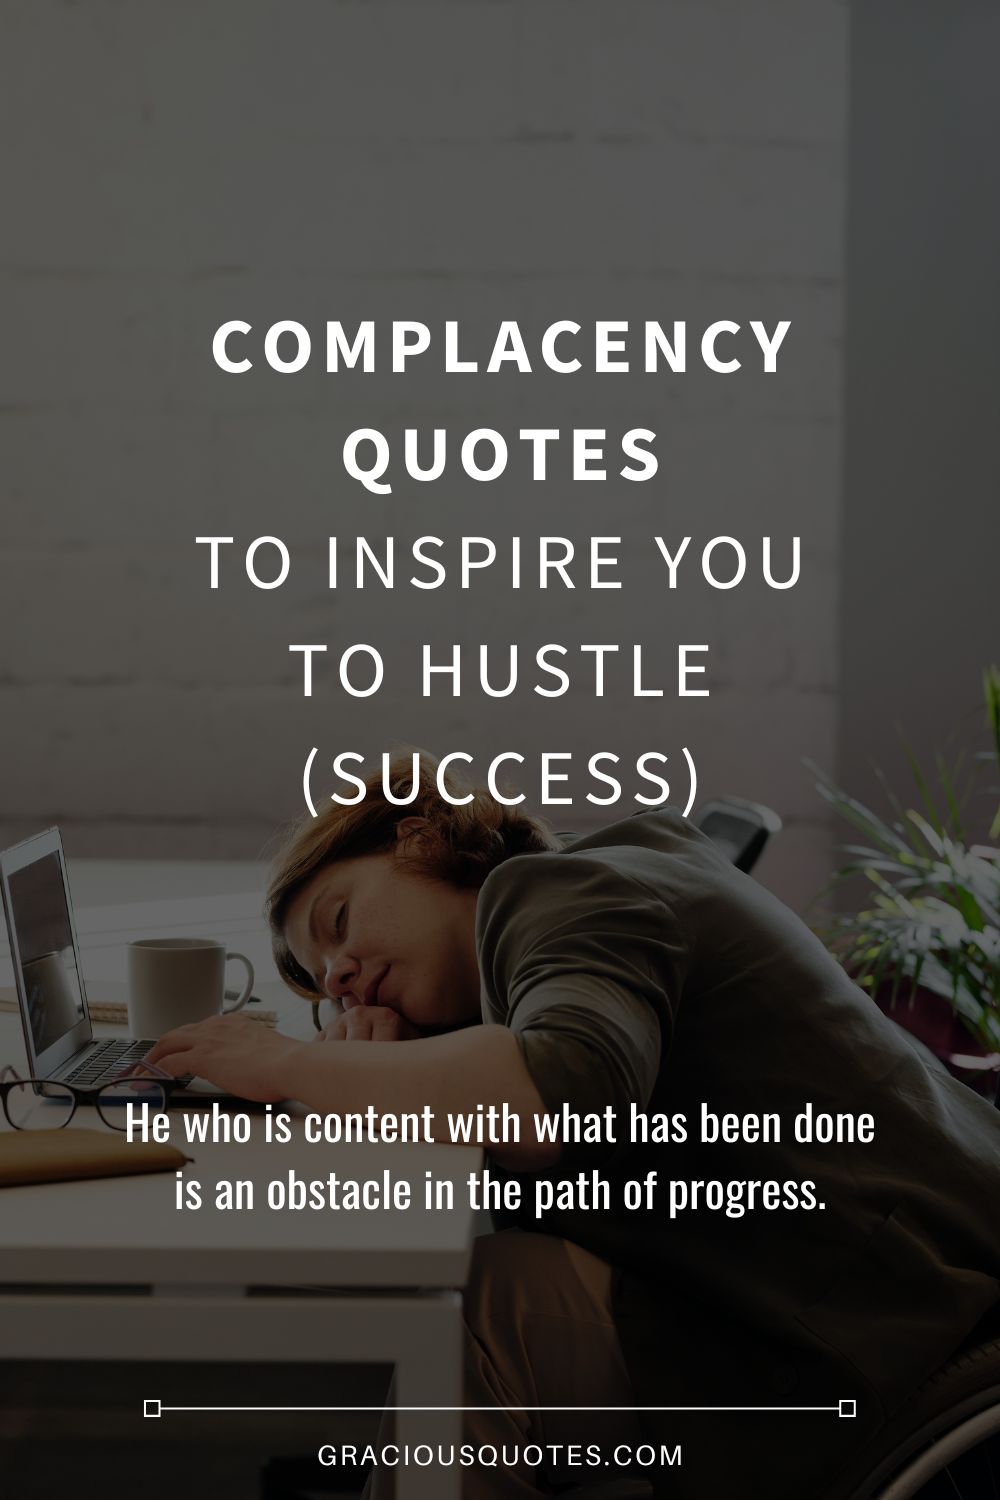 Complacency Quotes to Inspire You to Hustle (SUCCESS) - Gracious Quotes